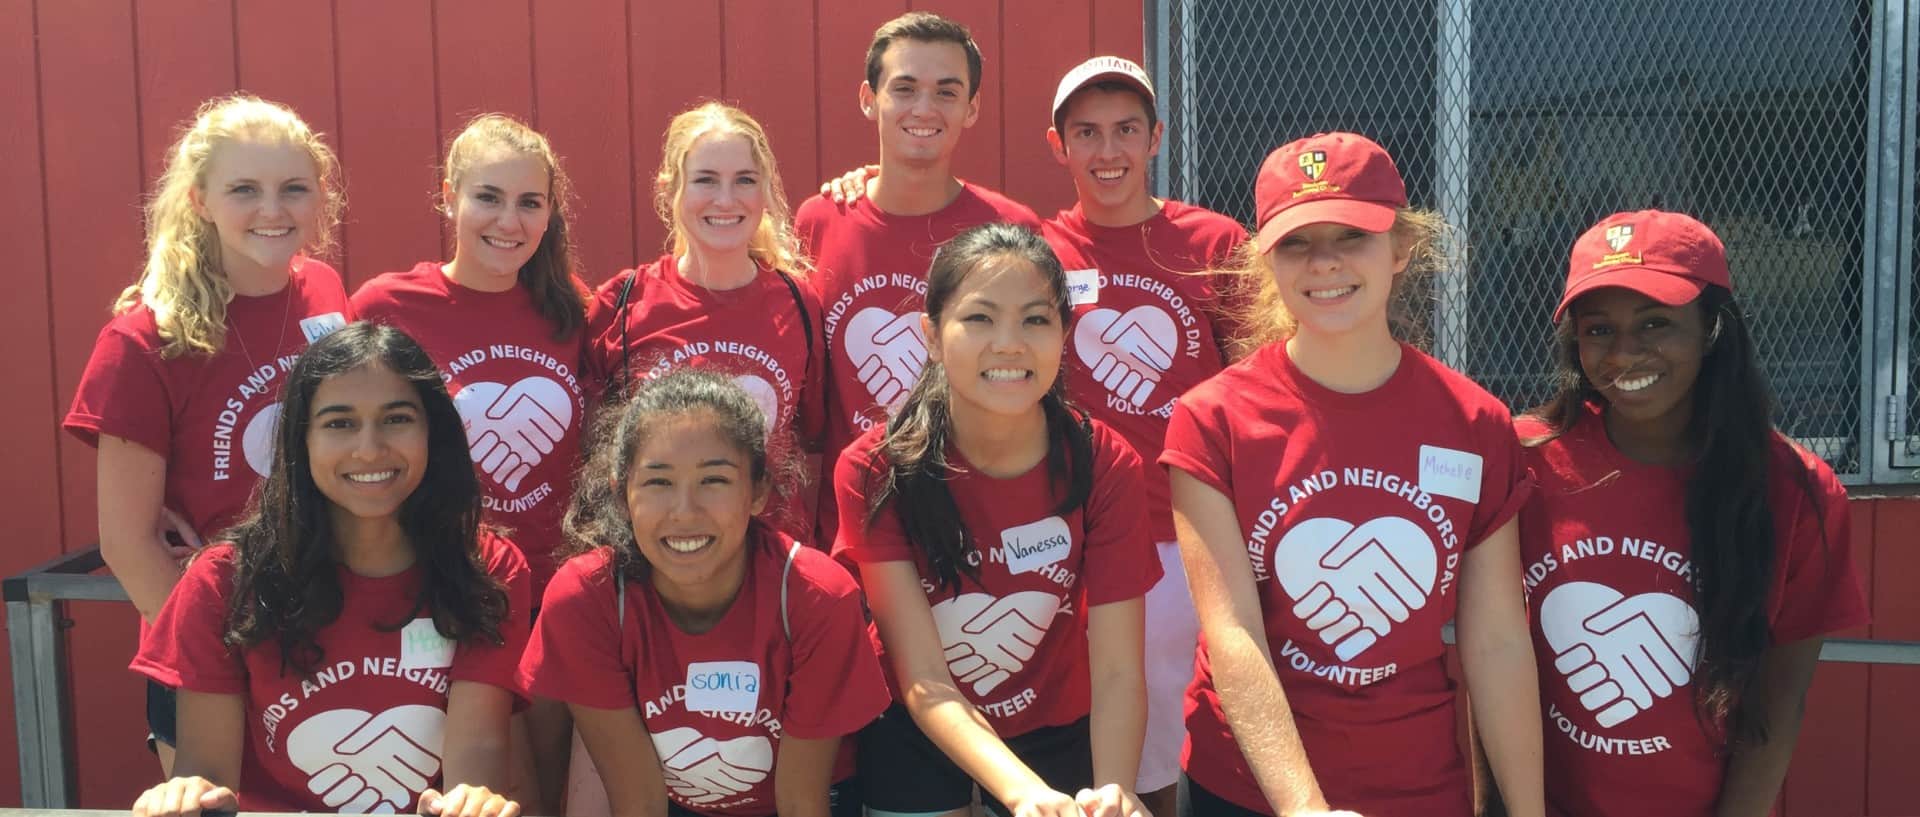 Featured image for “Viterbi Day of Service”